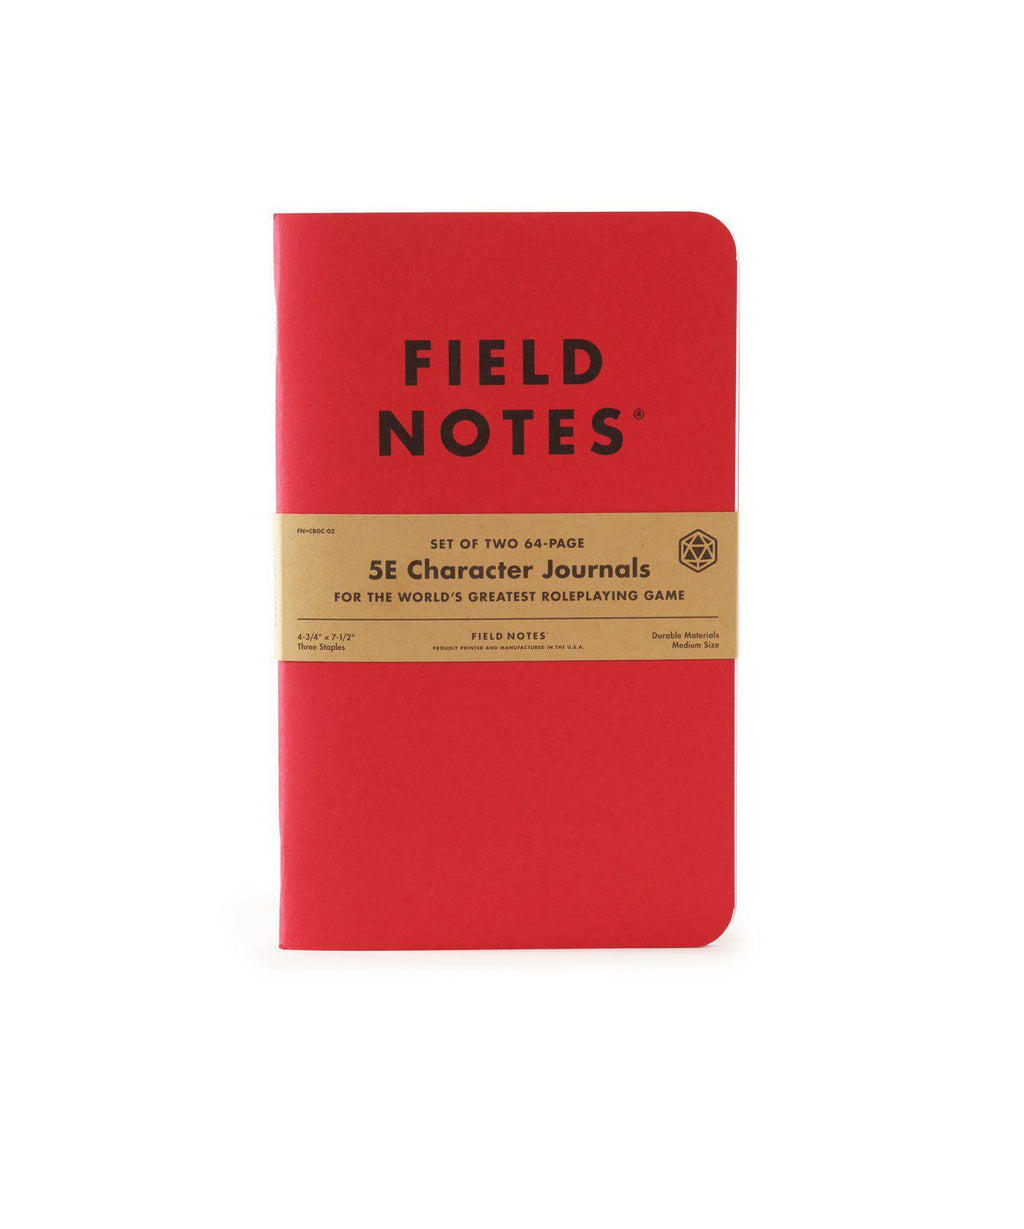 Field Notes | 5E Character Journals